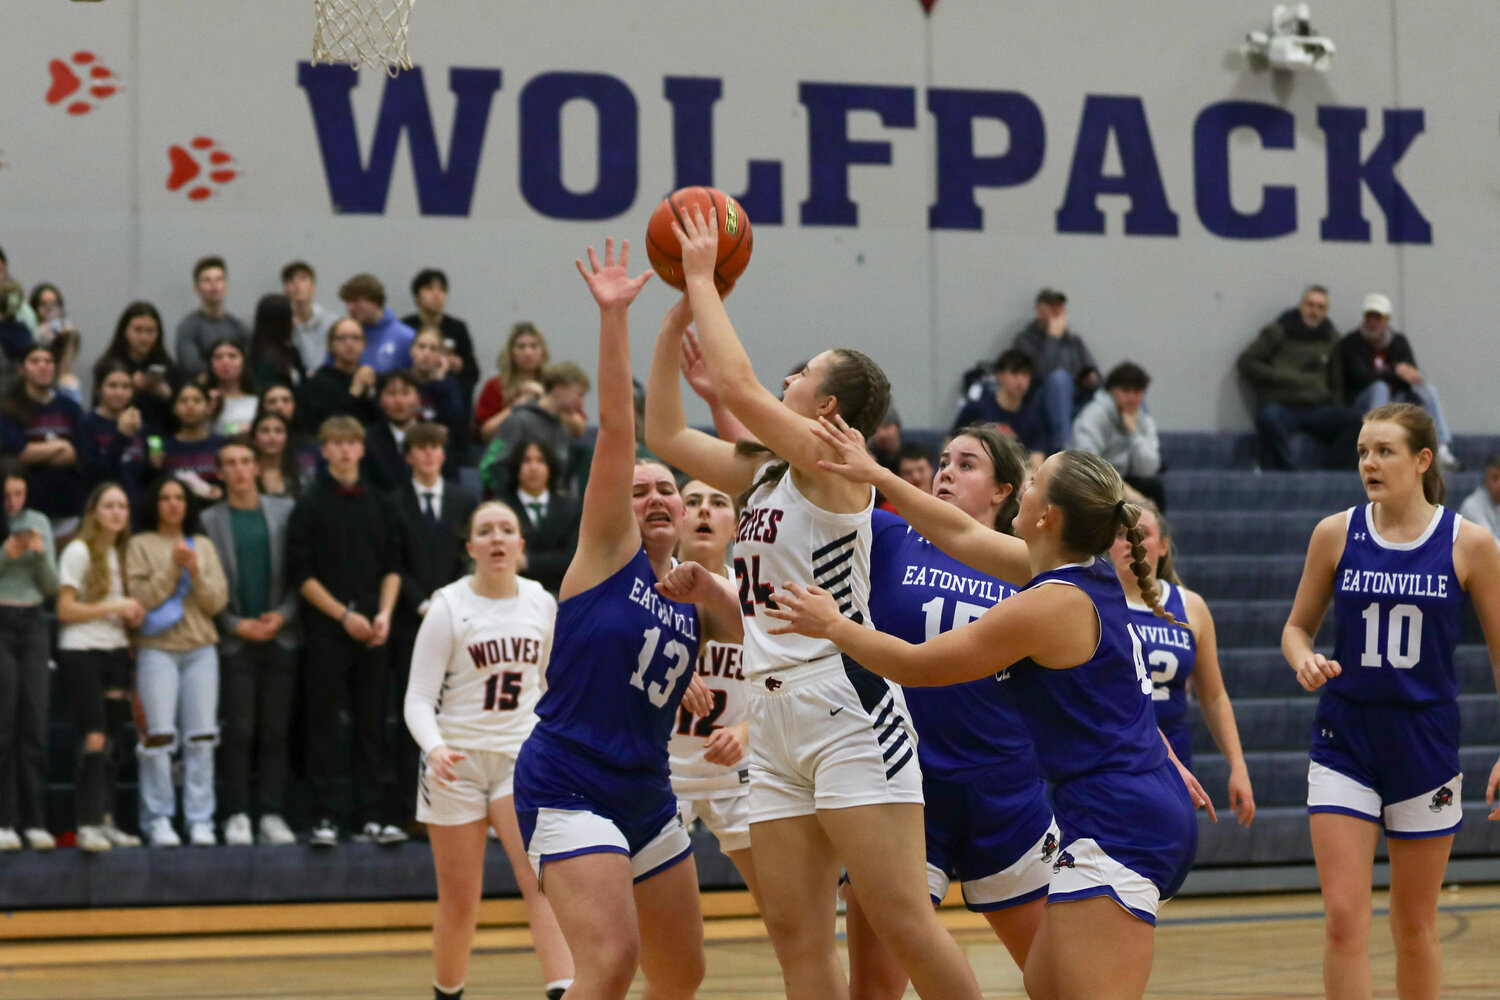 Ella Reichart draws contact and a foul during Black Hills' win over Eatonville on Dec. 4.